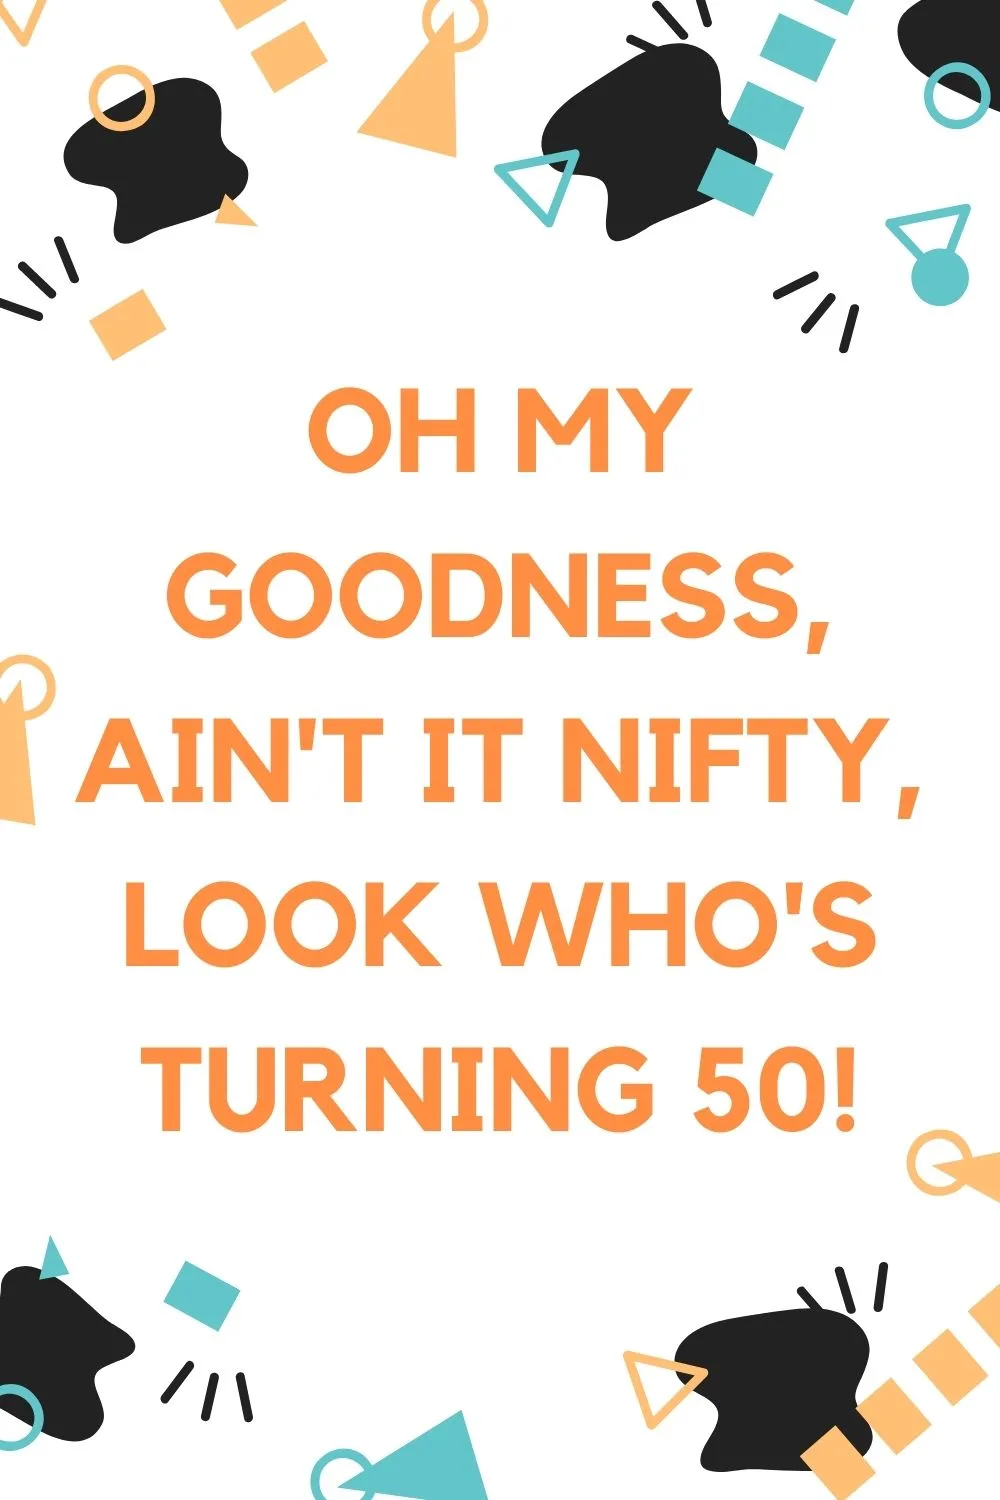 50th birthday invitation - Oh my goodness, ain't it nifty, look who's turning 50!